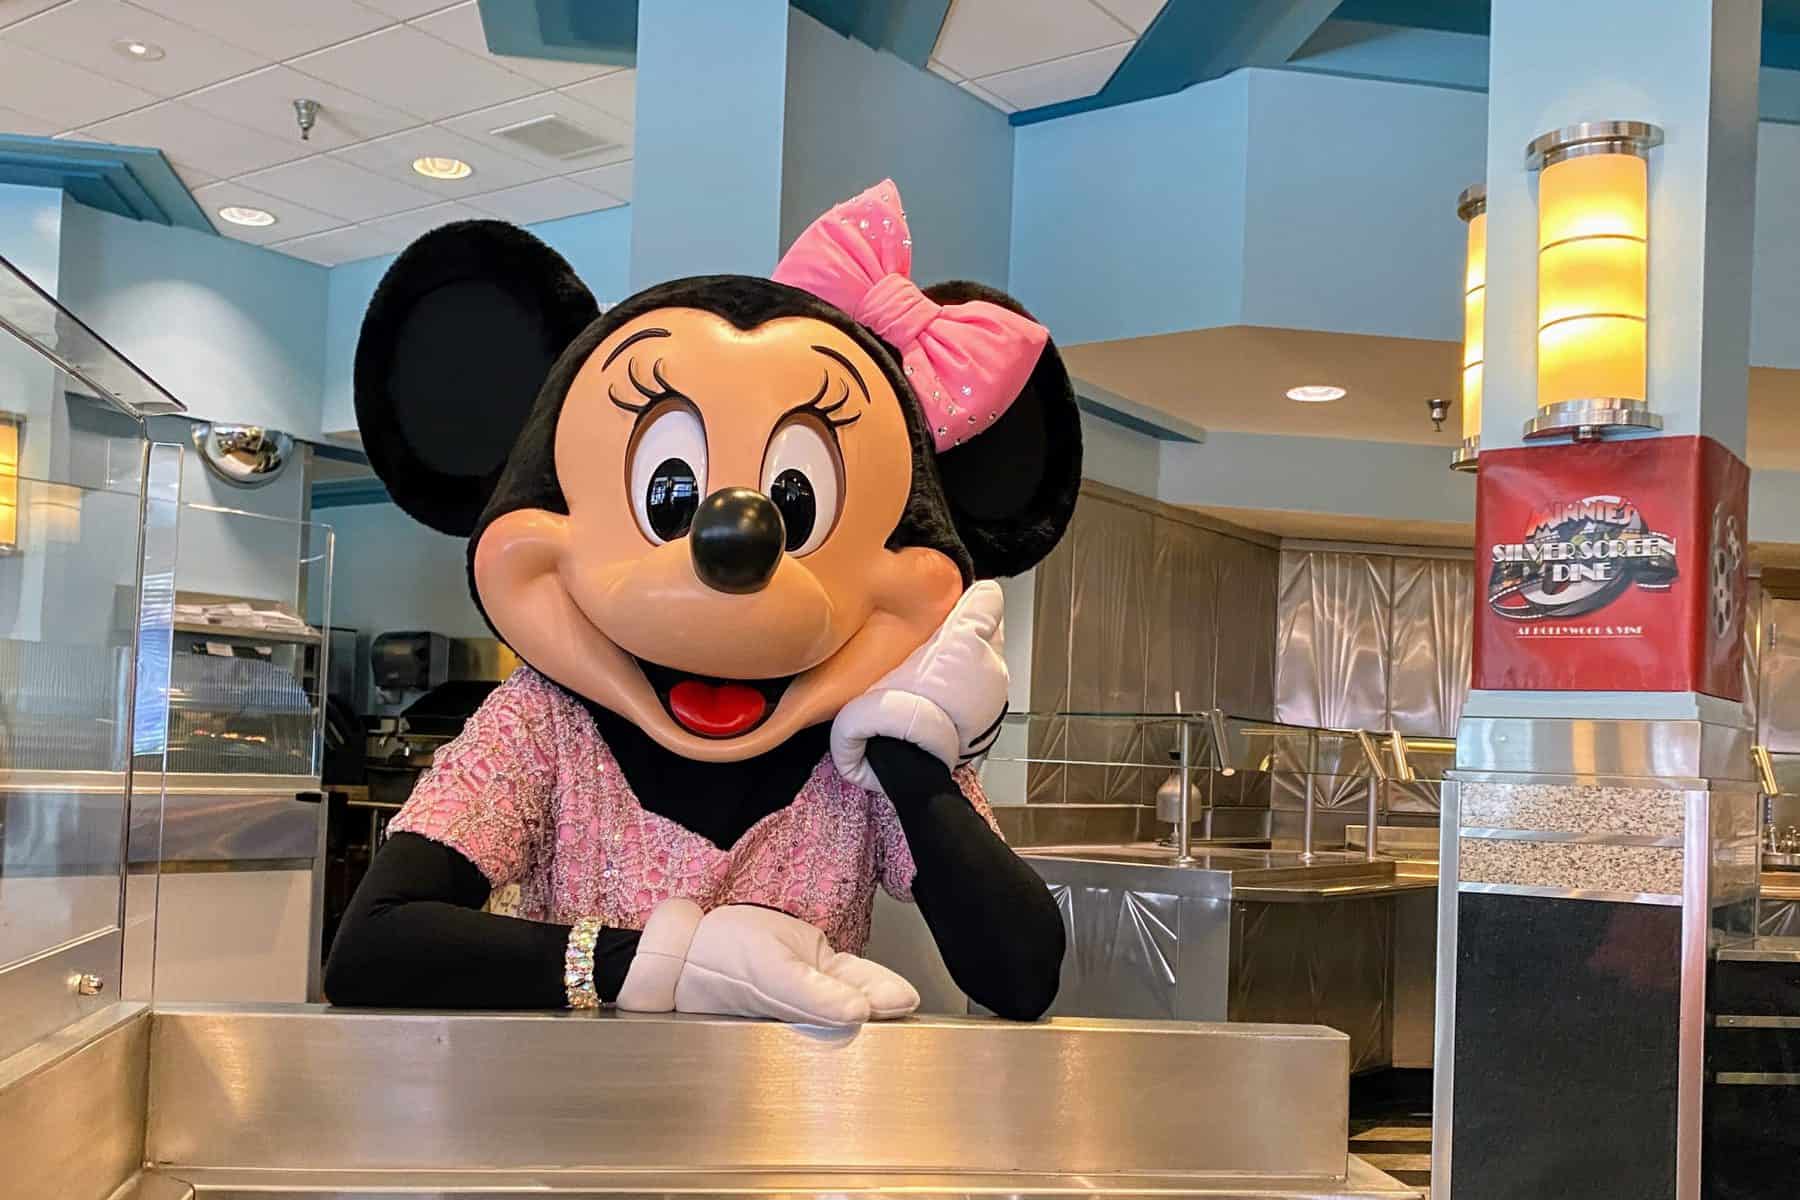 Our Review of Minnie’s Seasonal Dining at Hollywood & Vine